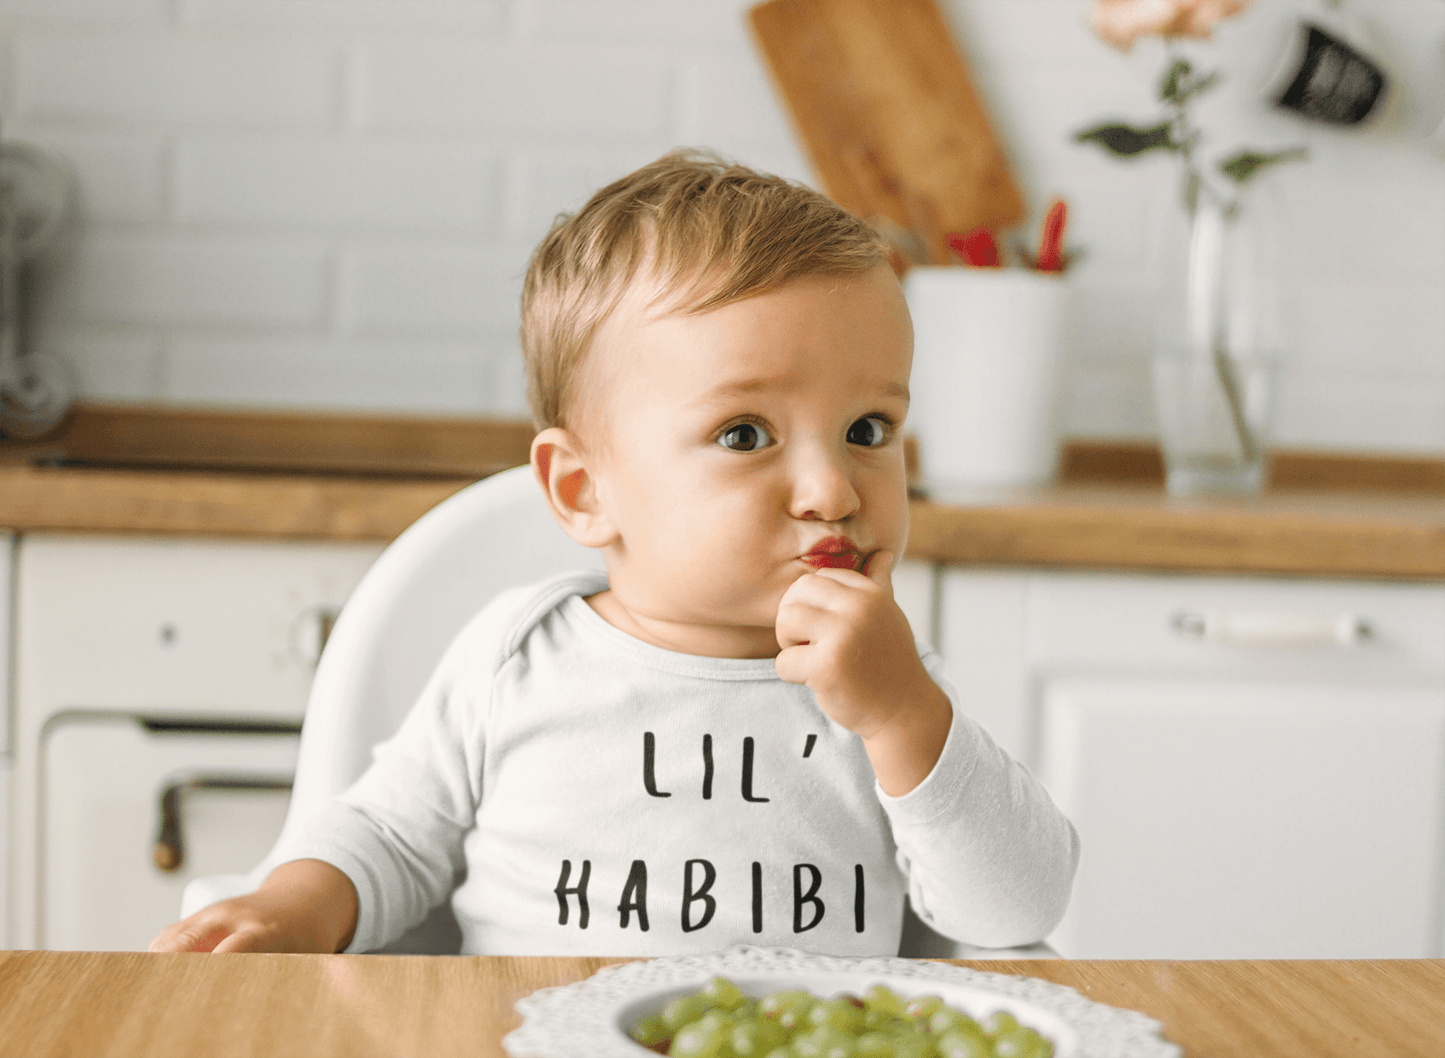 Lil' Habibi Long Sleeved Onesie for Muslim Baby | NB to 18 months - SunnahBay